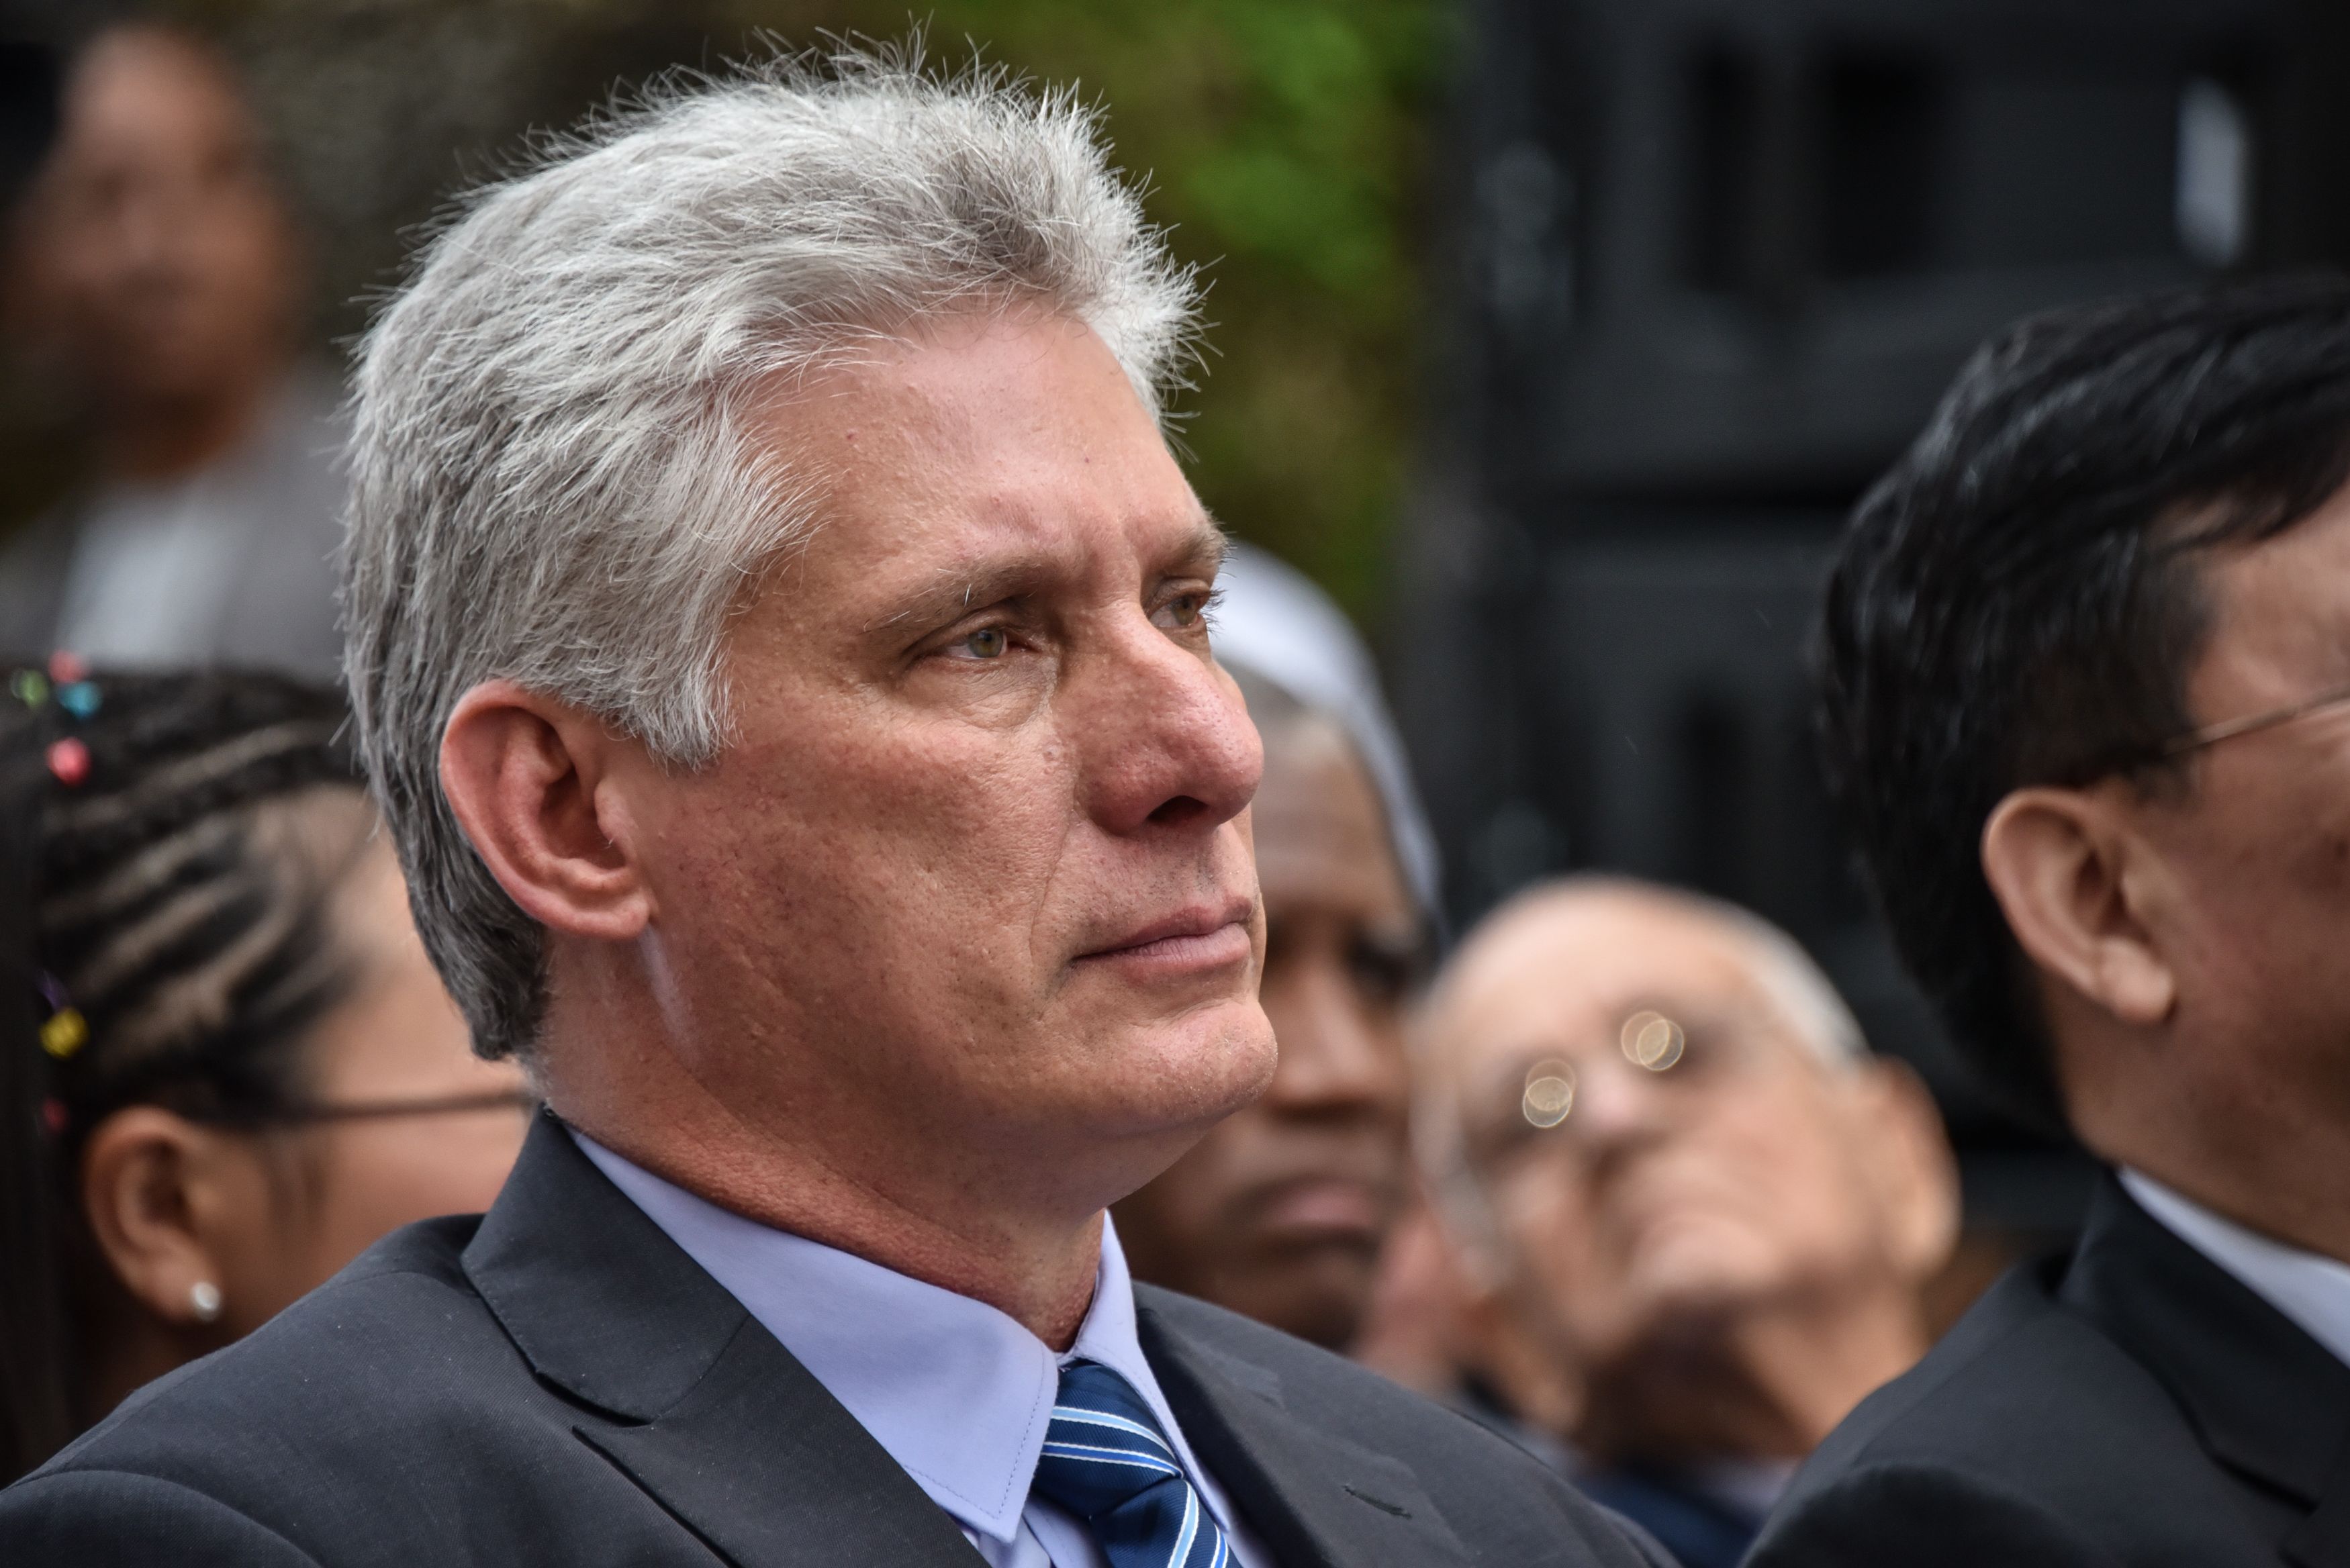 Cuban first Vice-President Miguel Diaz-Canel (R) attends the opening of the XXVII Havana International Book Fair in Havana, on February 1, 2018. The book fair is dedicated to China. / AFP PHOTO / ADALBERTO ROQUE (Photo credit should read ADALBERTO ROQUE/AFP/Getty Images)